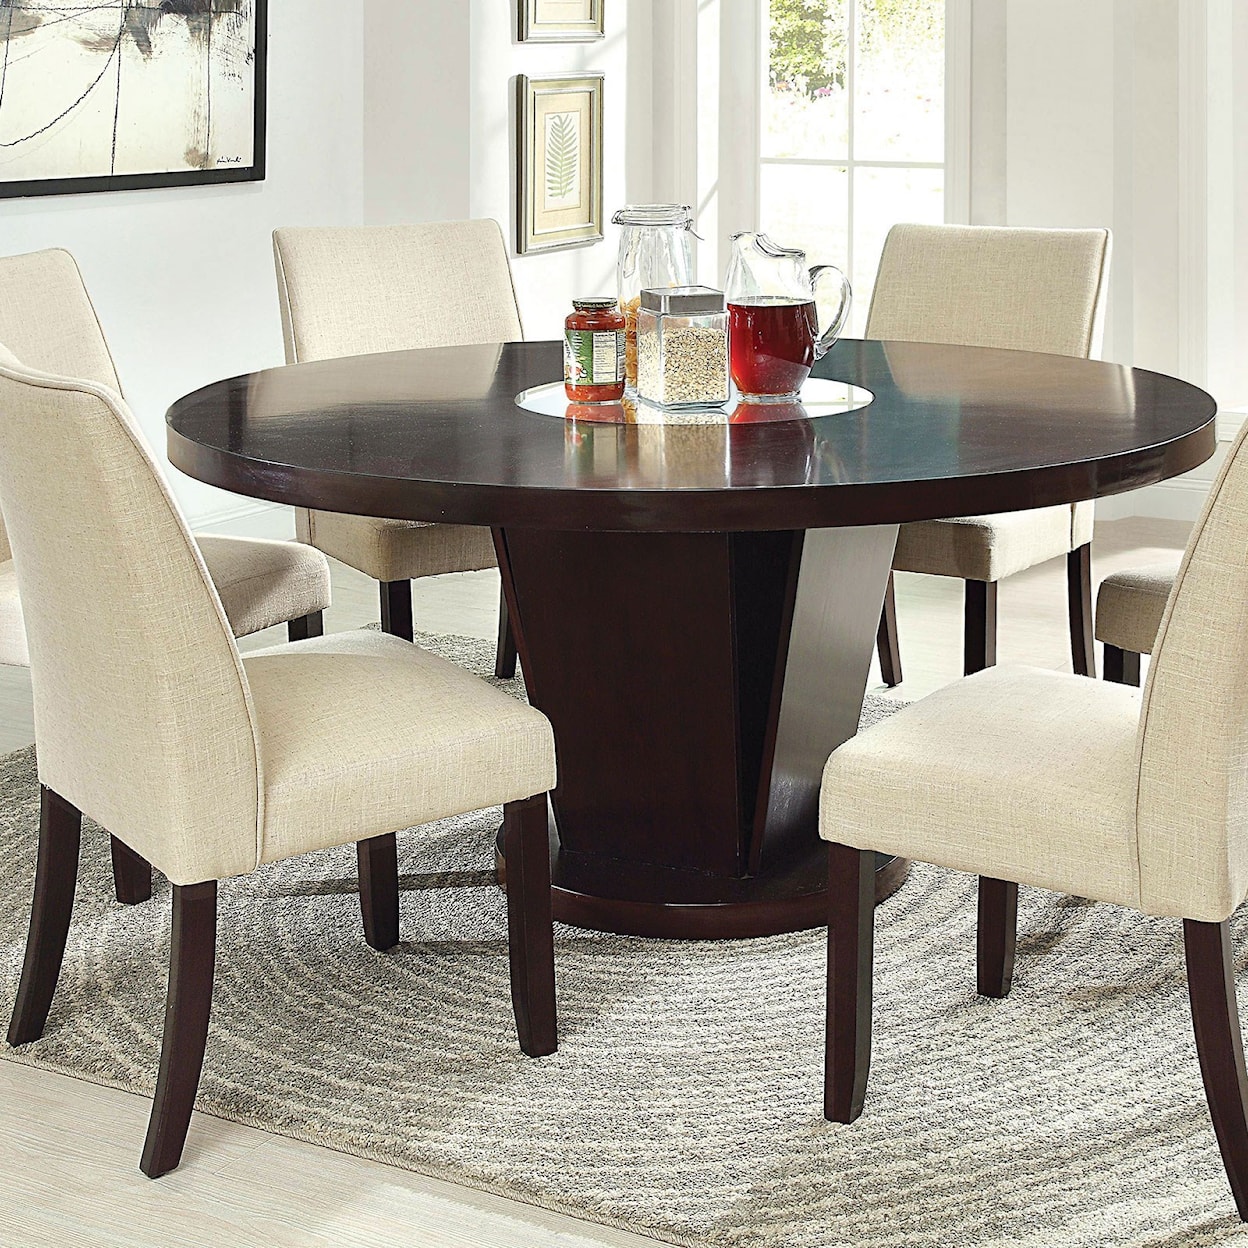 Furniture of America Cimma Round Dining Table